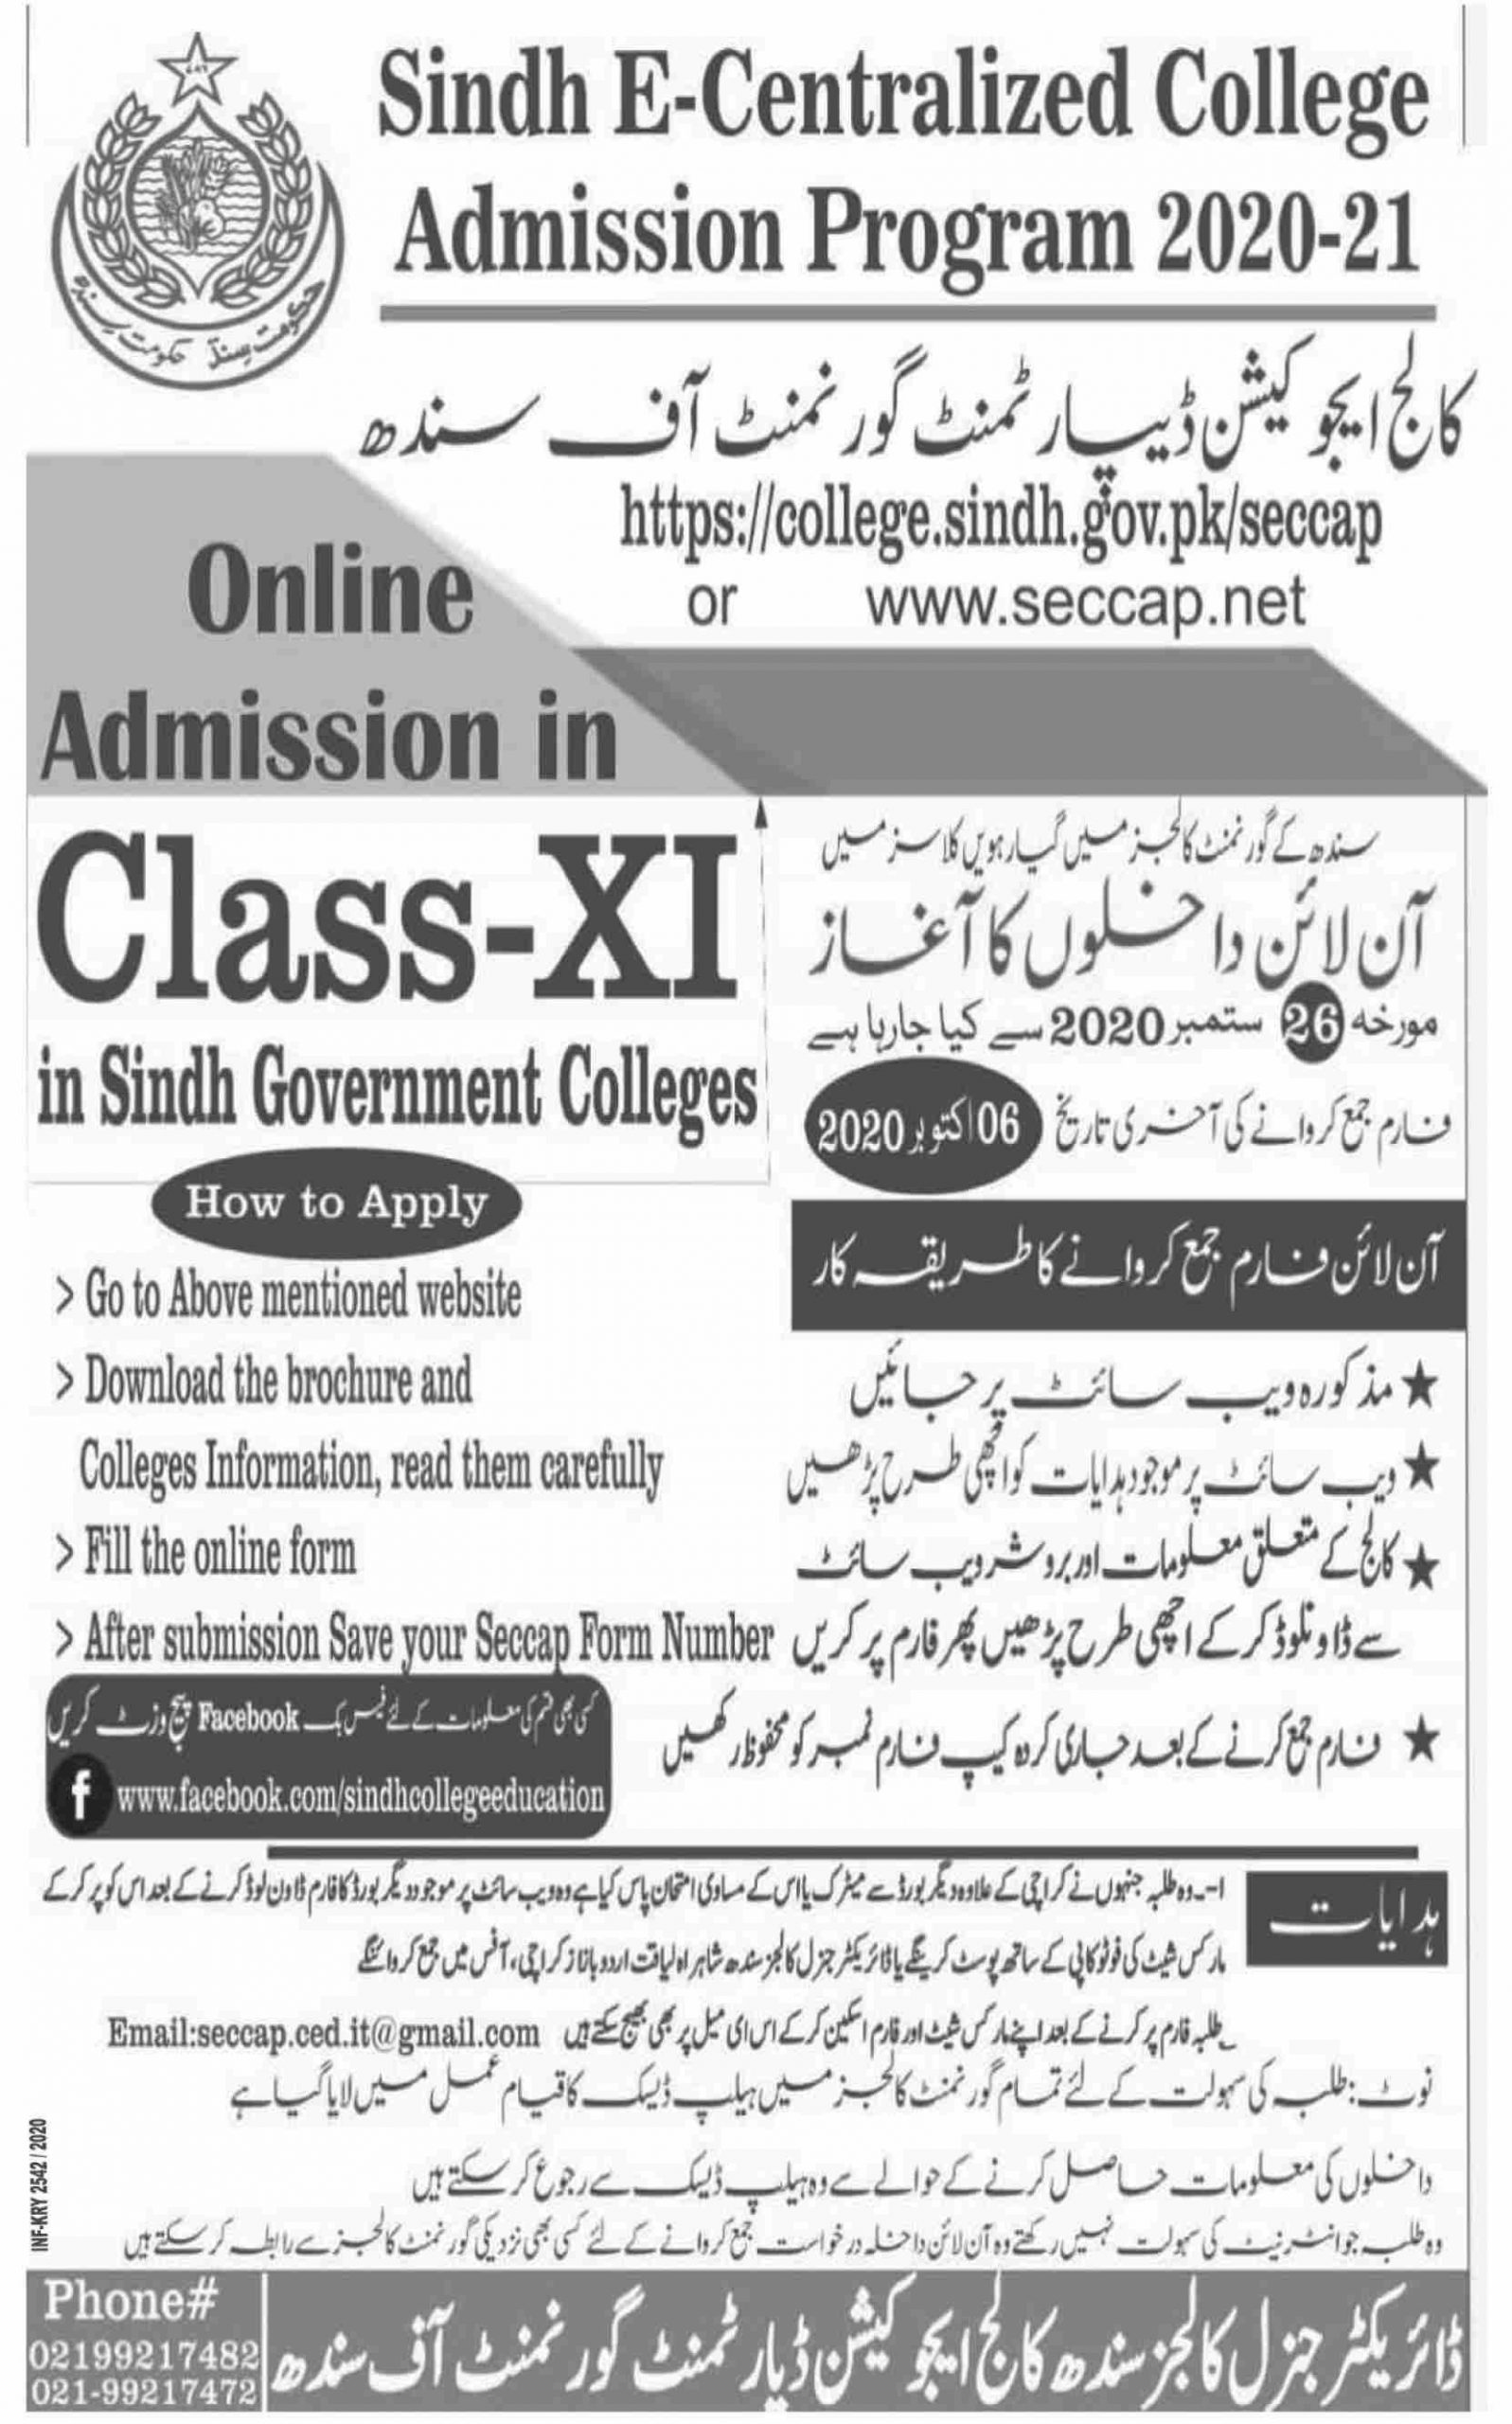 SECCAP Sindh Online Admission 2020 Class-9th